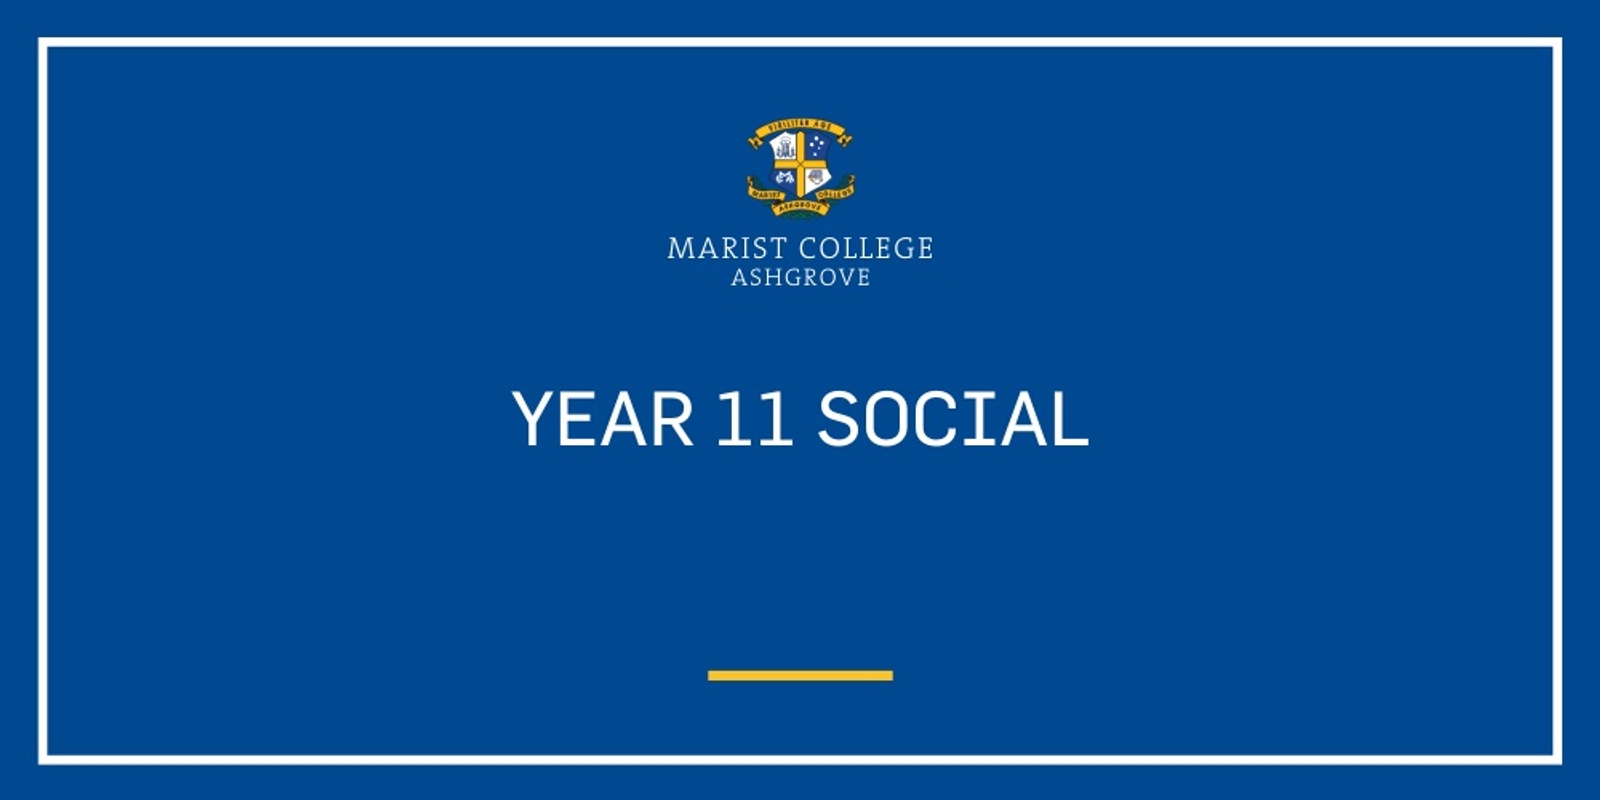 Banner image for 2023 Marist College Ashgrove Year 11 Social